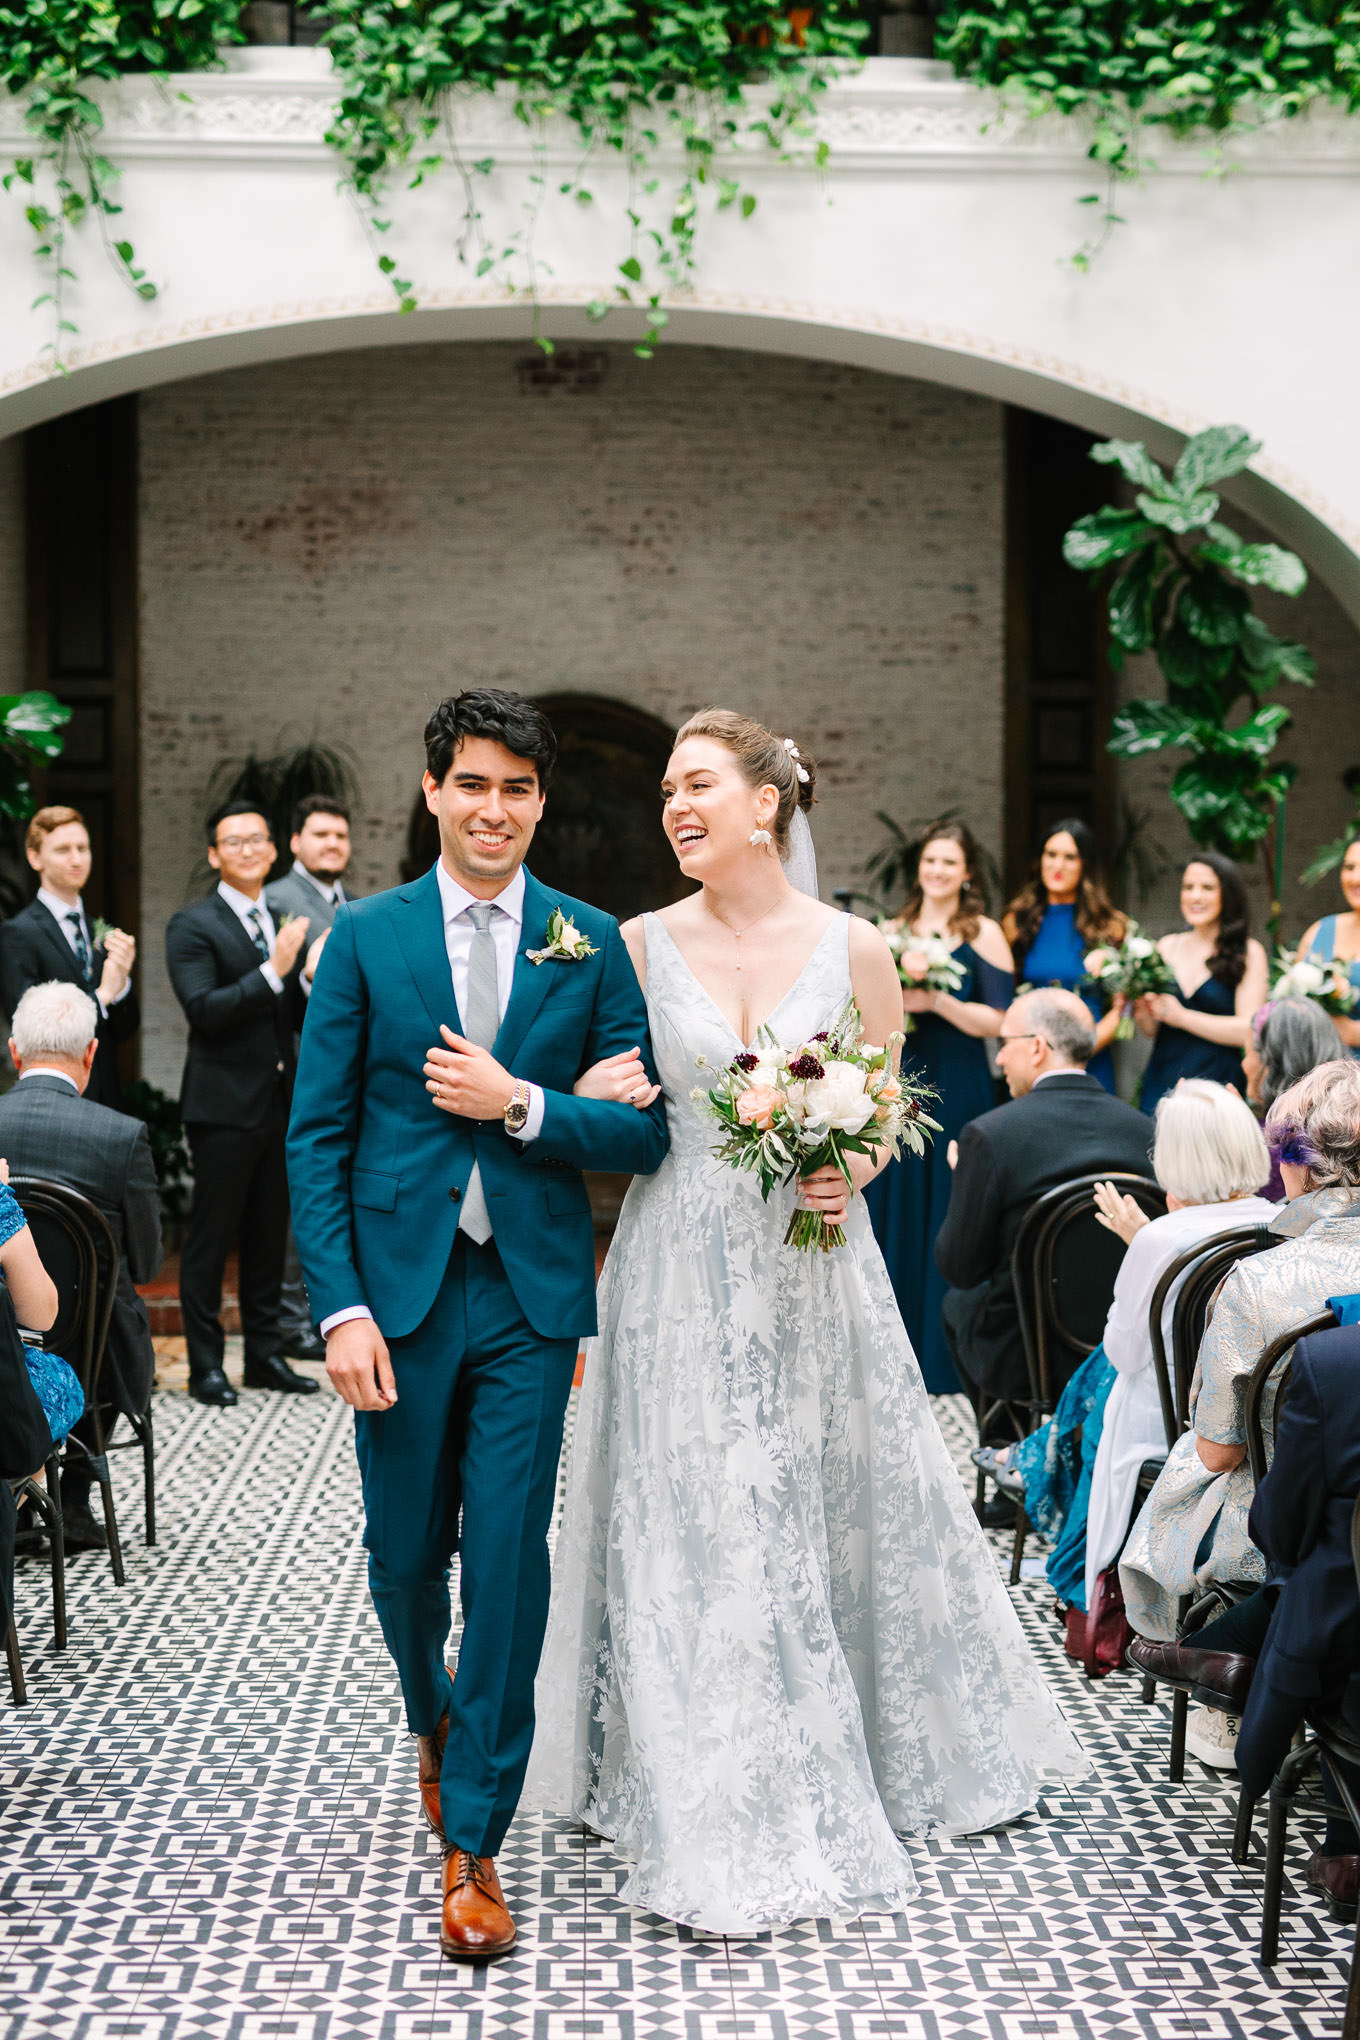 Ebell of Long Beach wedding | Wedding and elopement photography roundup | Los Angeles and Palm Springs photographer | #losangeleswedding #palmspringswedding #elopementphotographer Source: Mary Costa Photography | Los Angeles